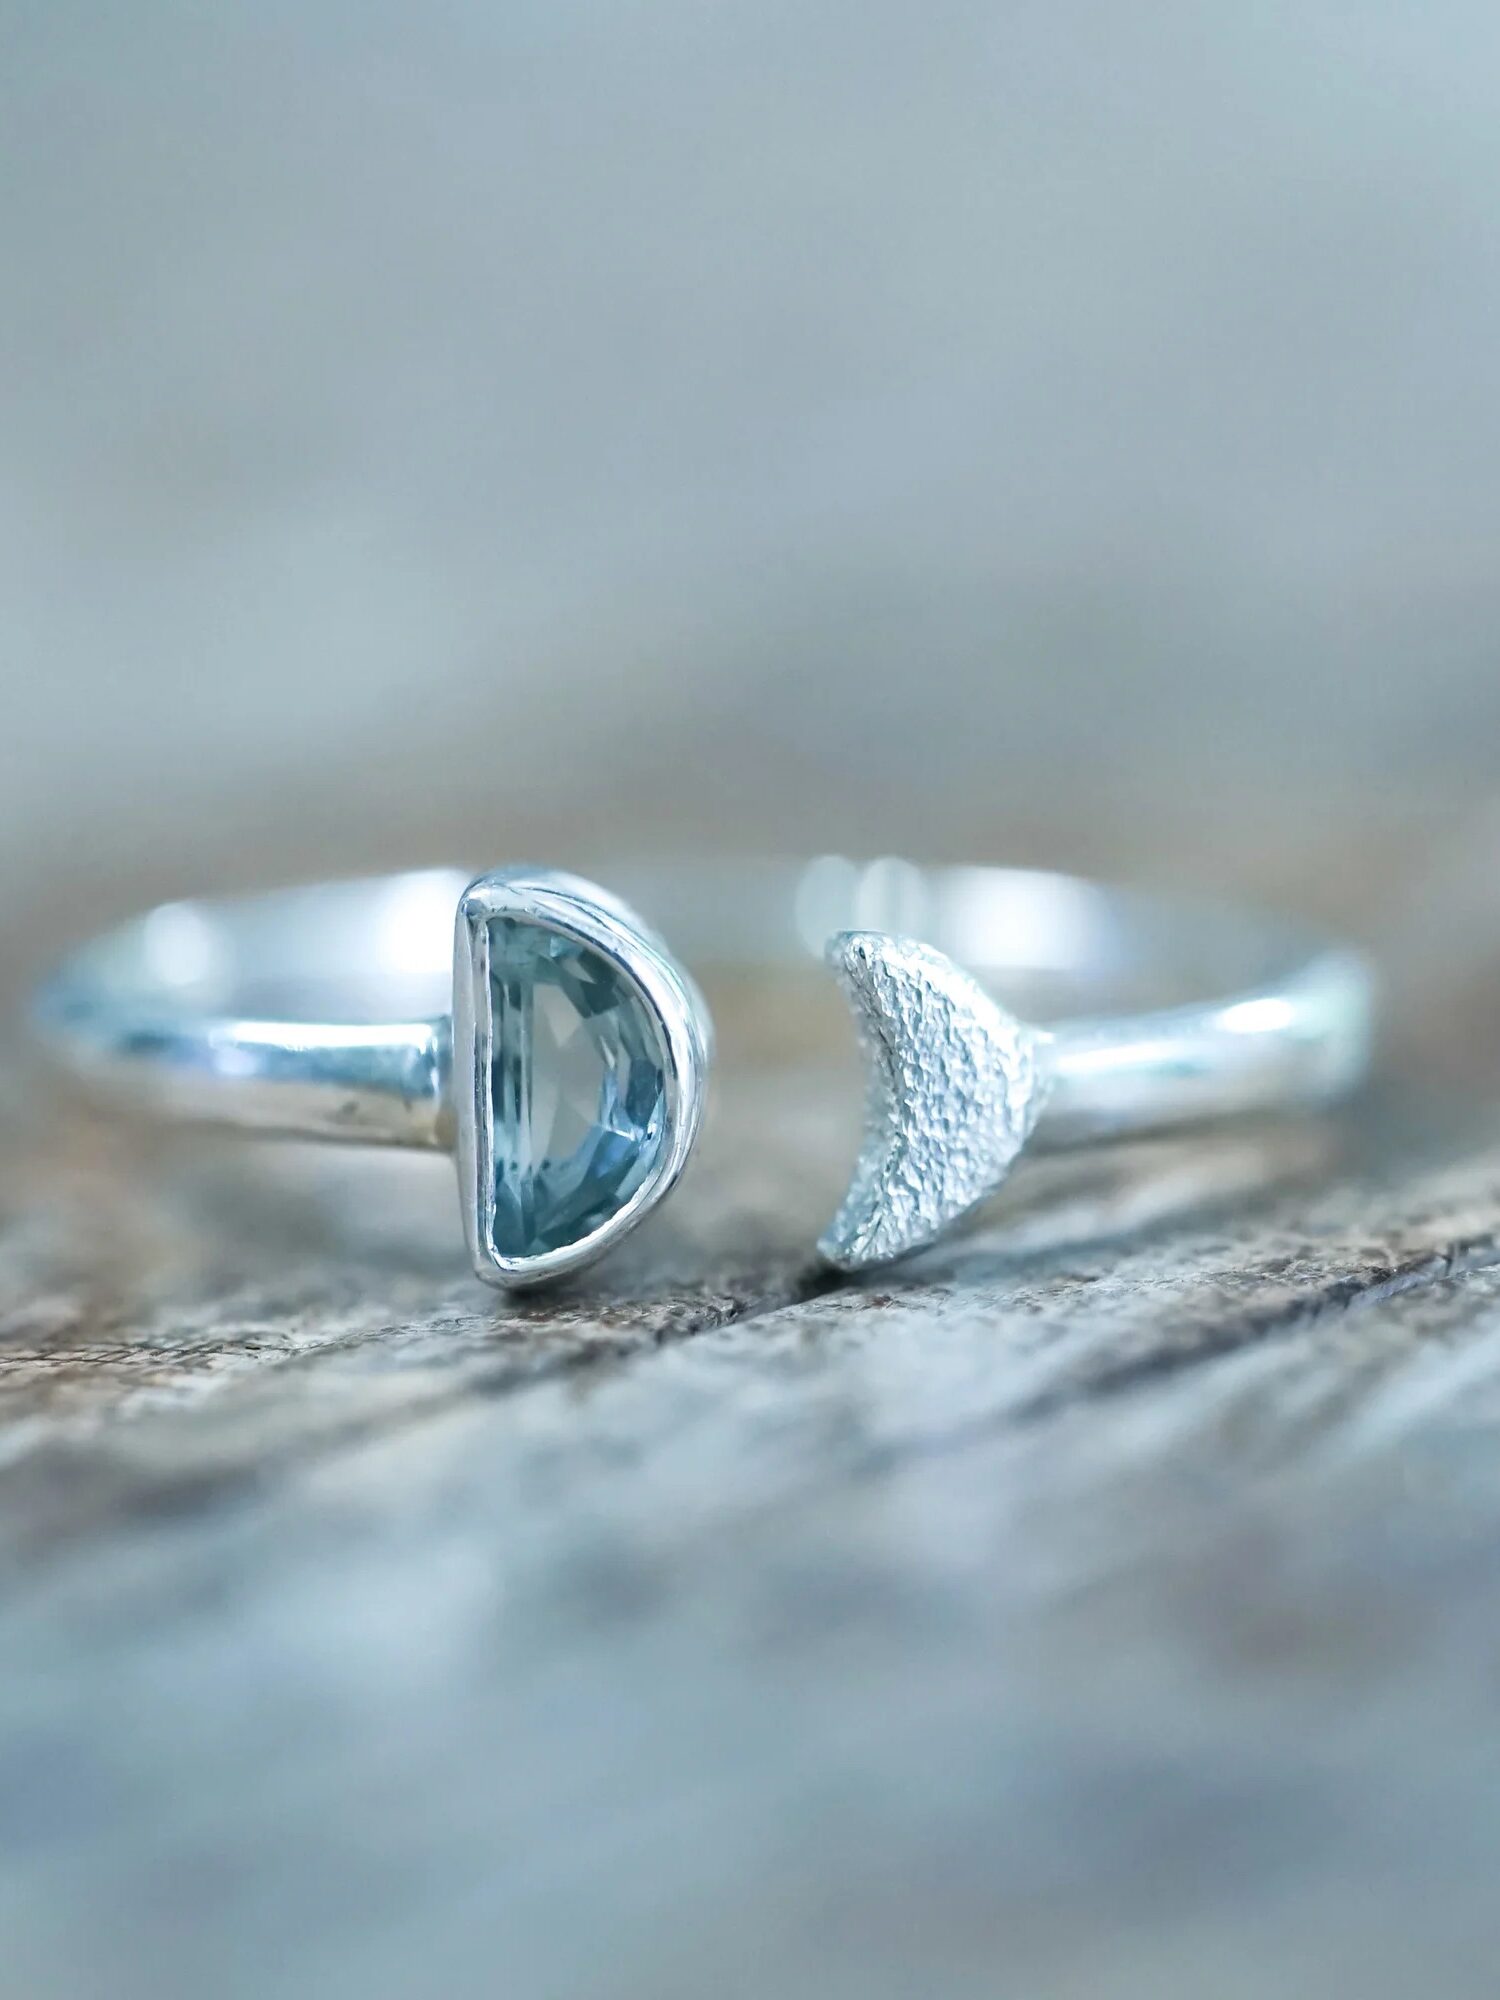 A silver ring with a moon-shaped split design, featuring one smooth and one textured half, resting on a wooden surface.